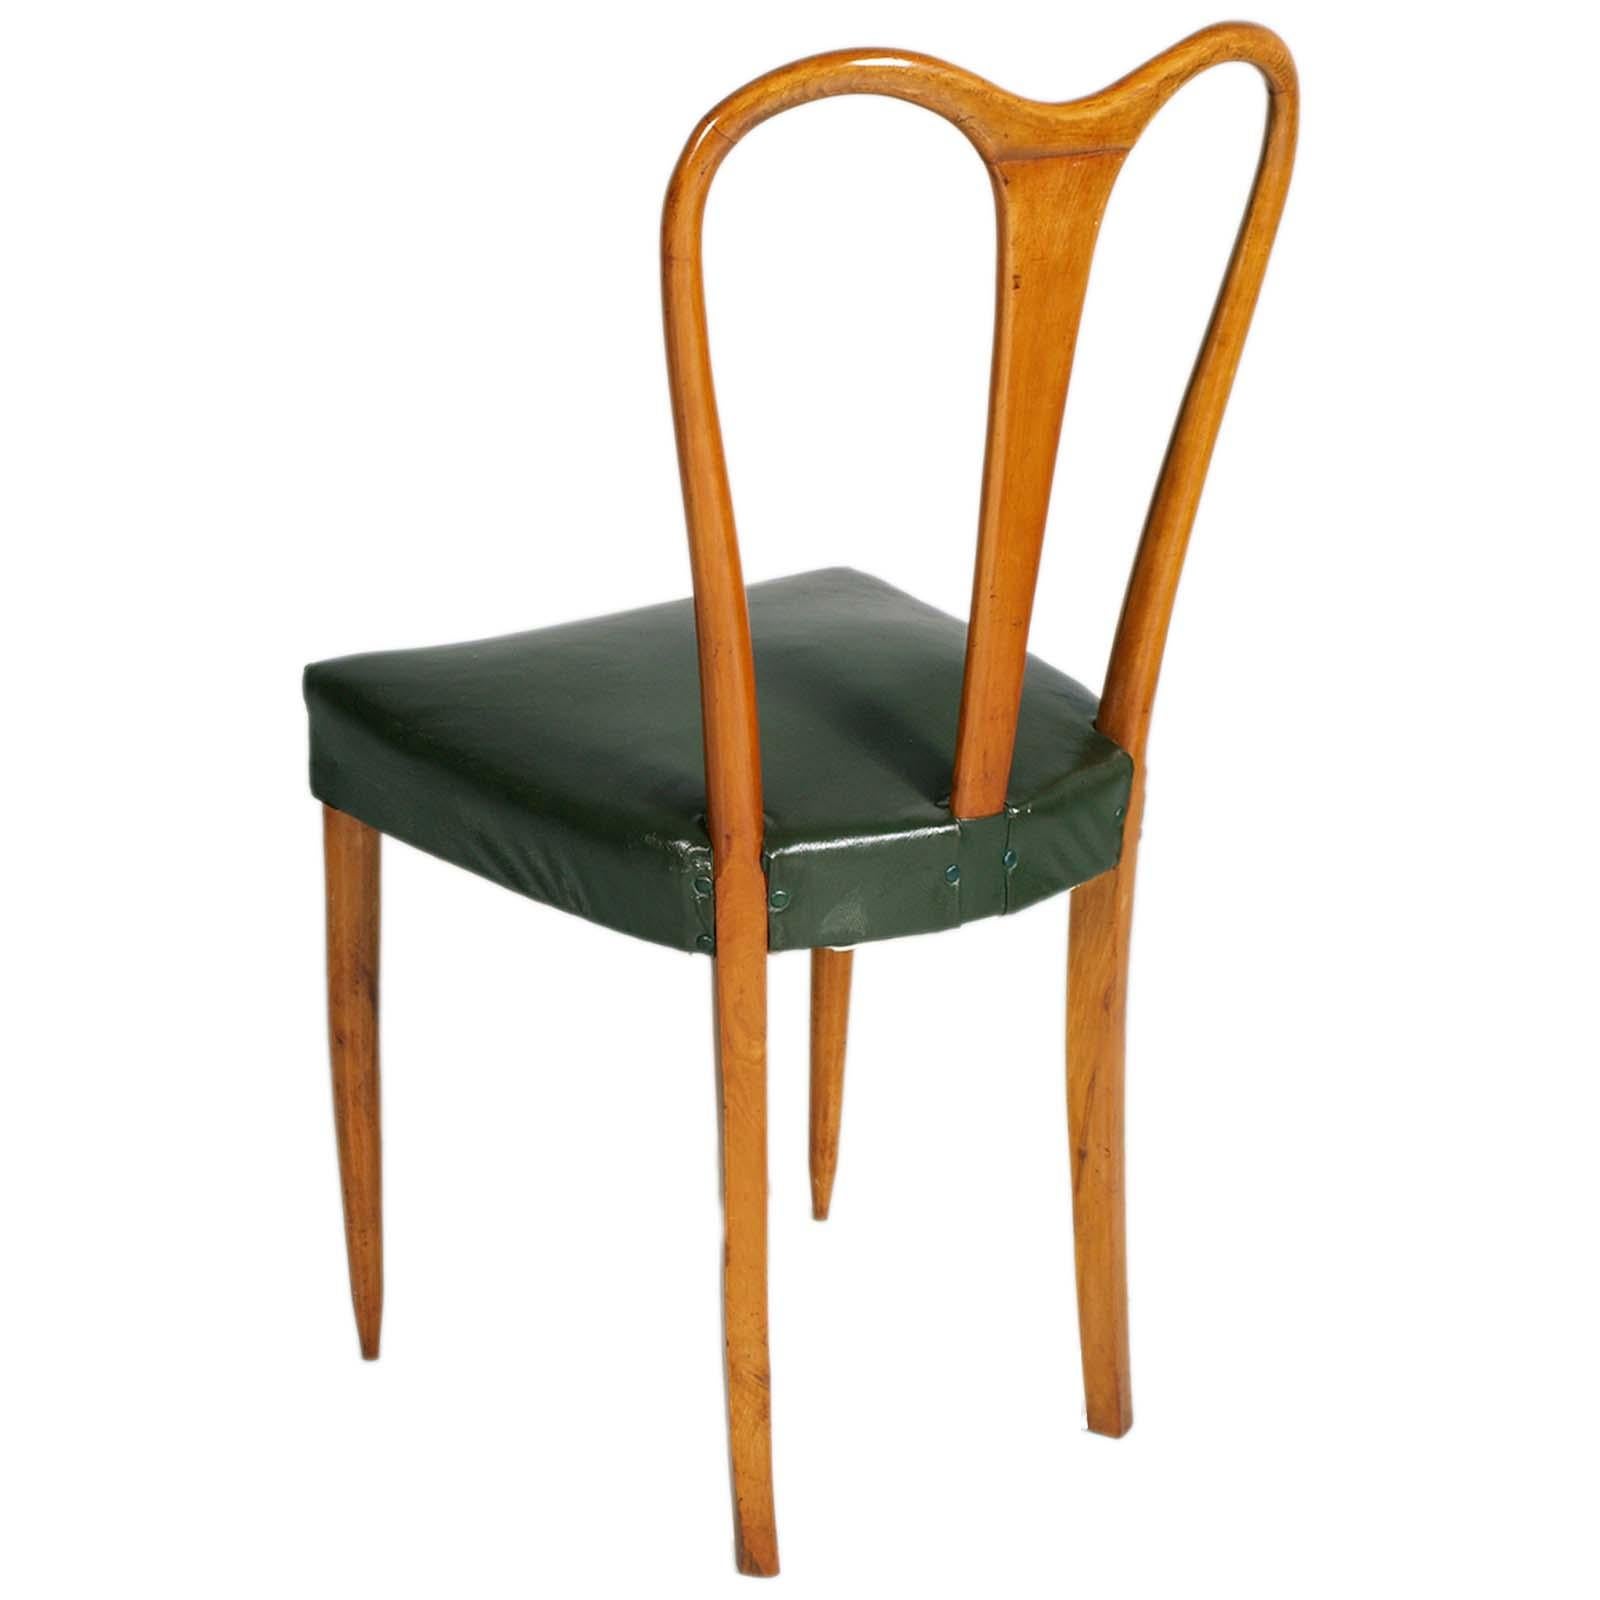 Italian Mid-Century Chairs by Ico Parisi for Fratelli Rizzi, Springs Seat & Leatherette For Sale